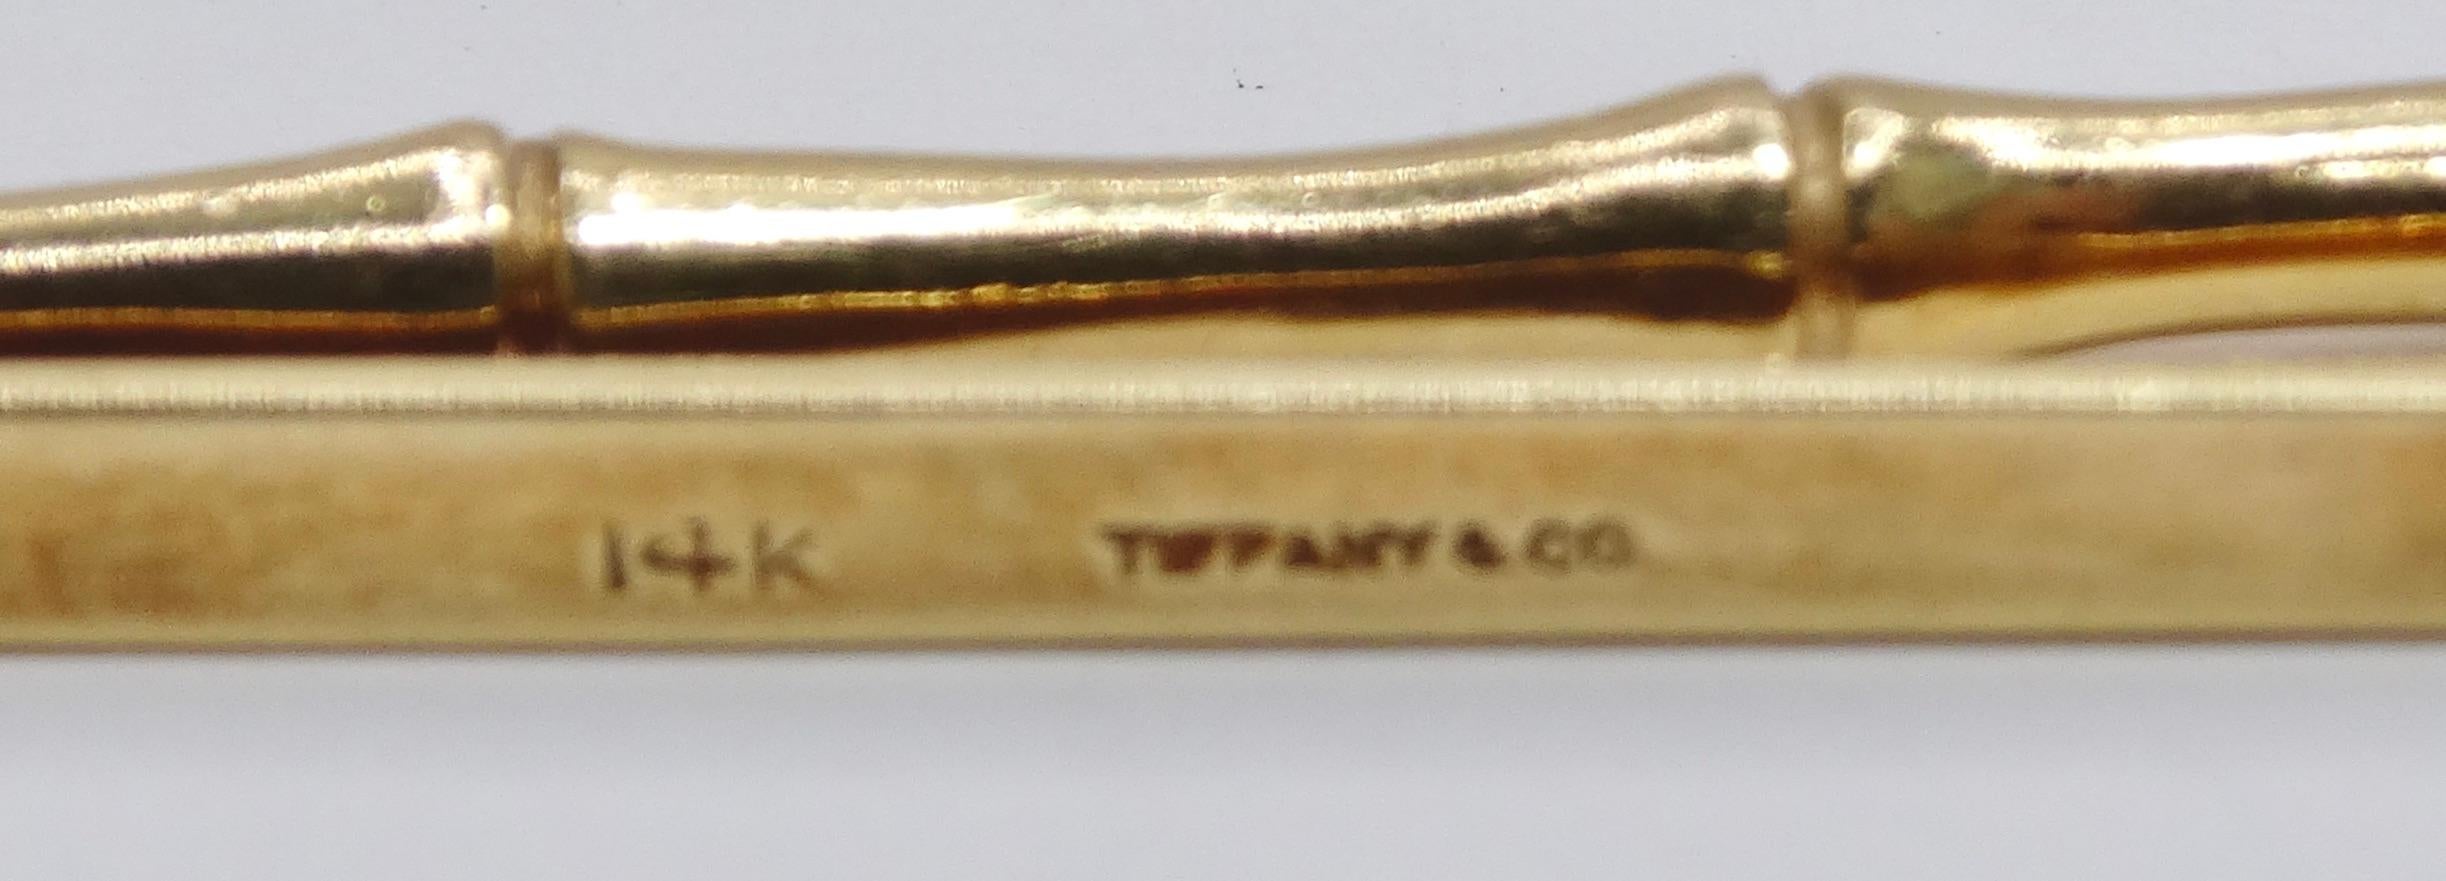 Brown Tiffany & Co. 14k Gold Bamboo Tie Clip